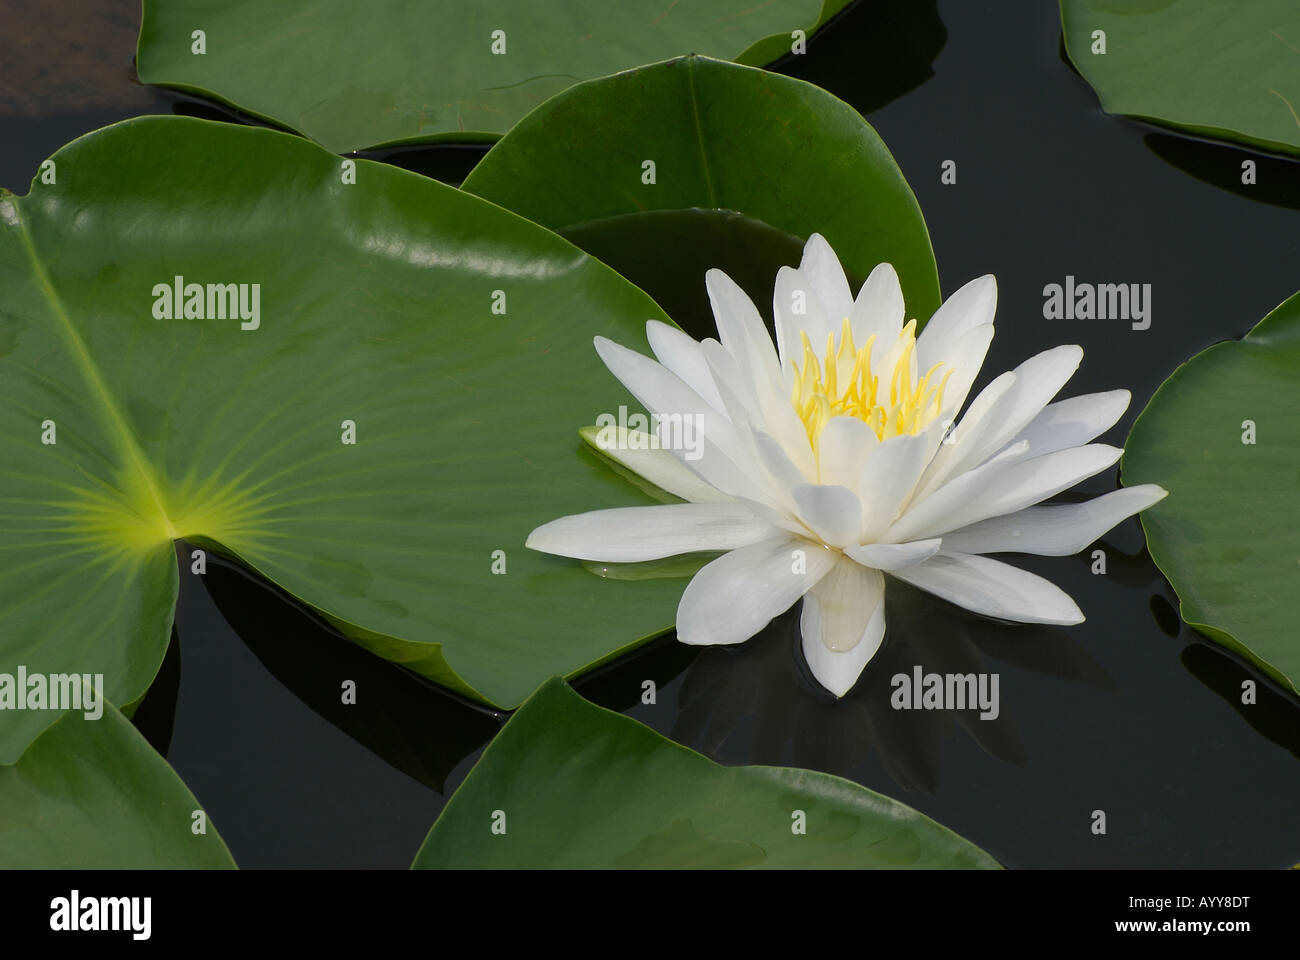 Fragrant White Water Lily [Nymphaea odorata] growing in Ohio pond, native North American wildflower Stock Photo